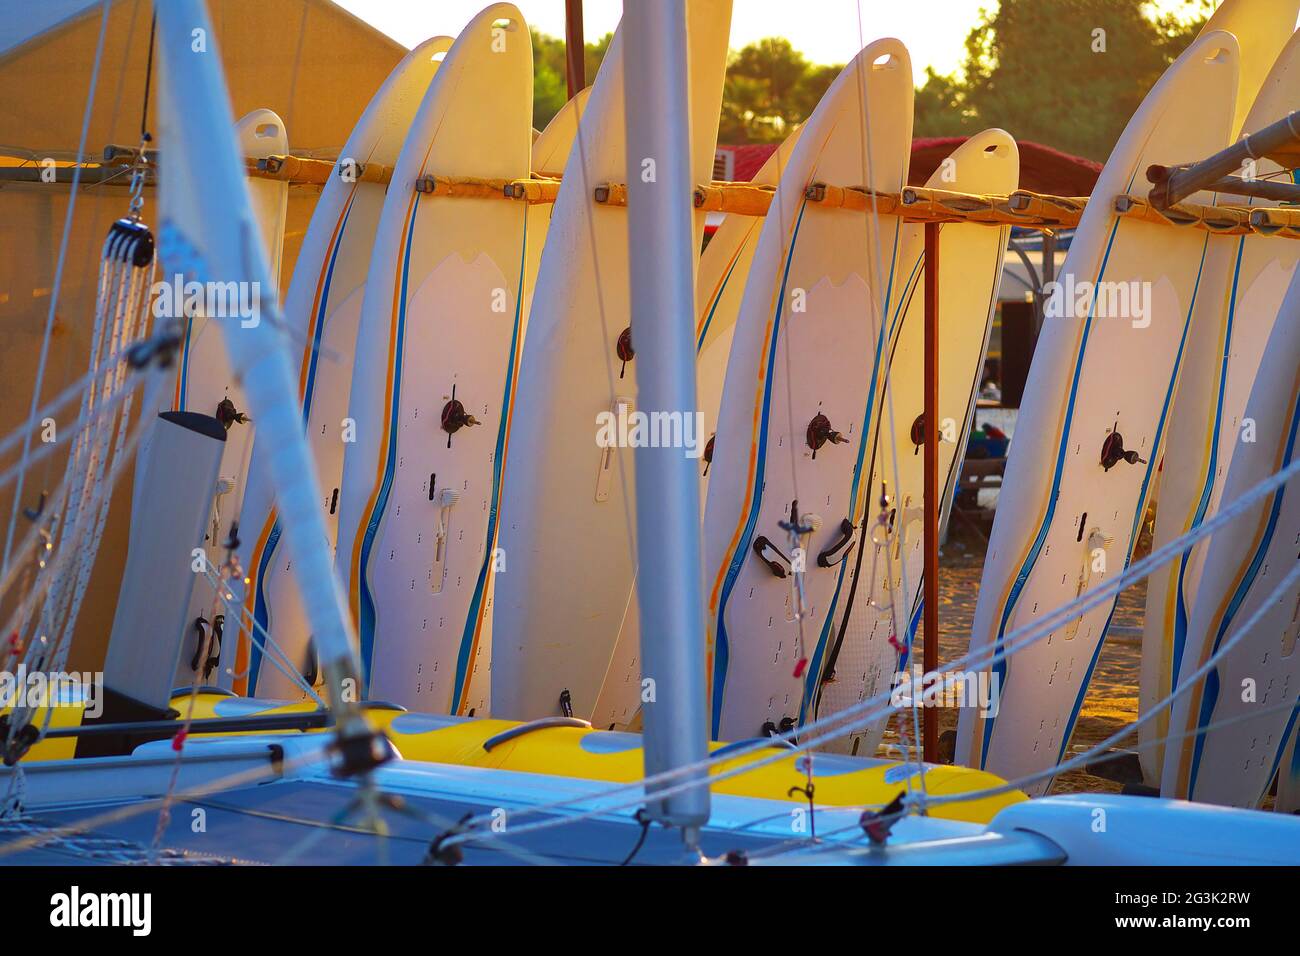 windsurfing boards storage on a beach watersports facility in early morning under rising sun light Stock Photo